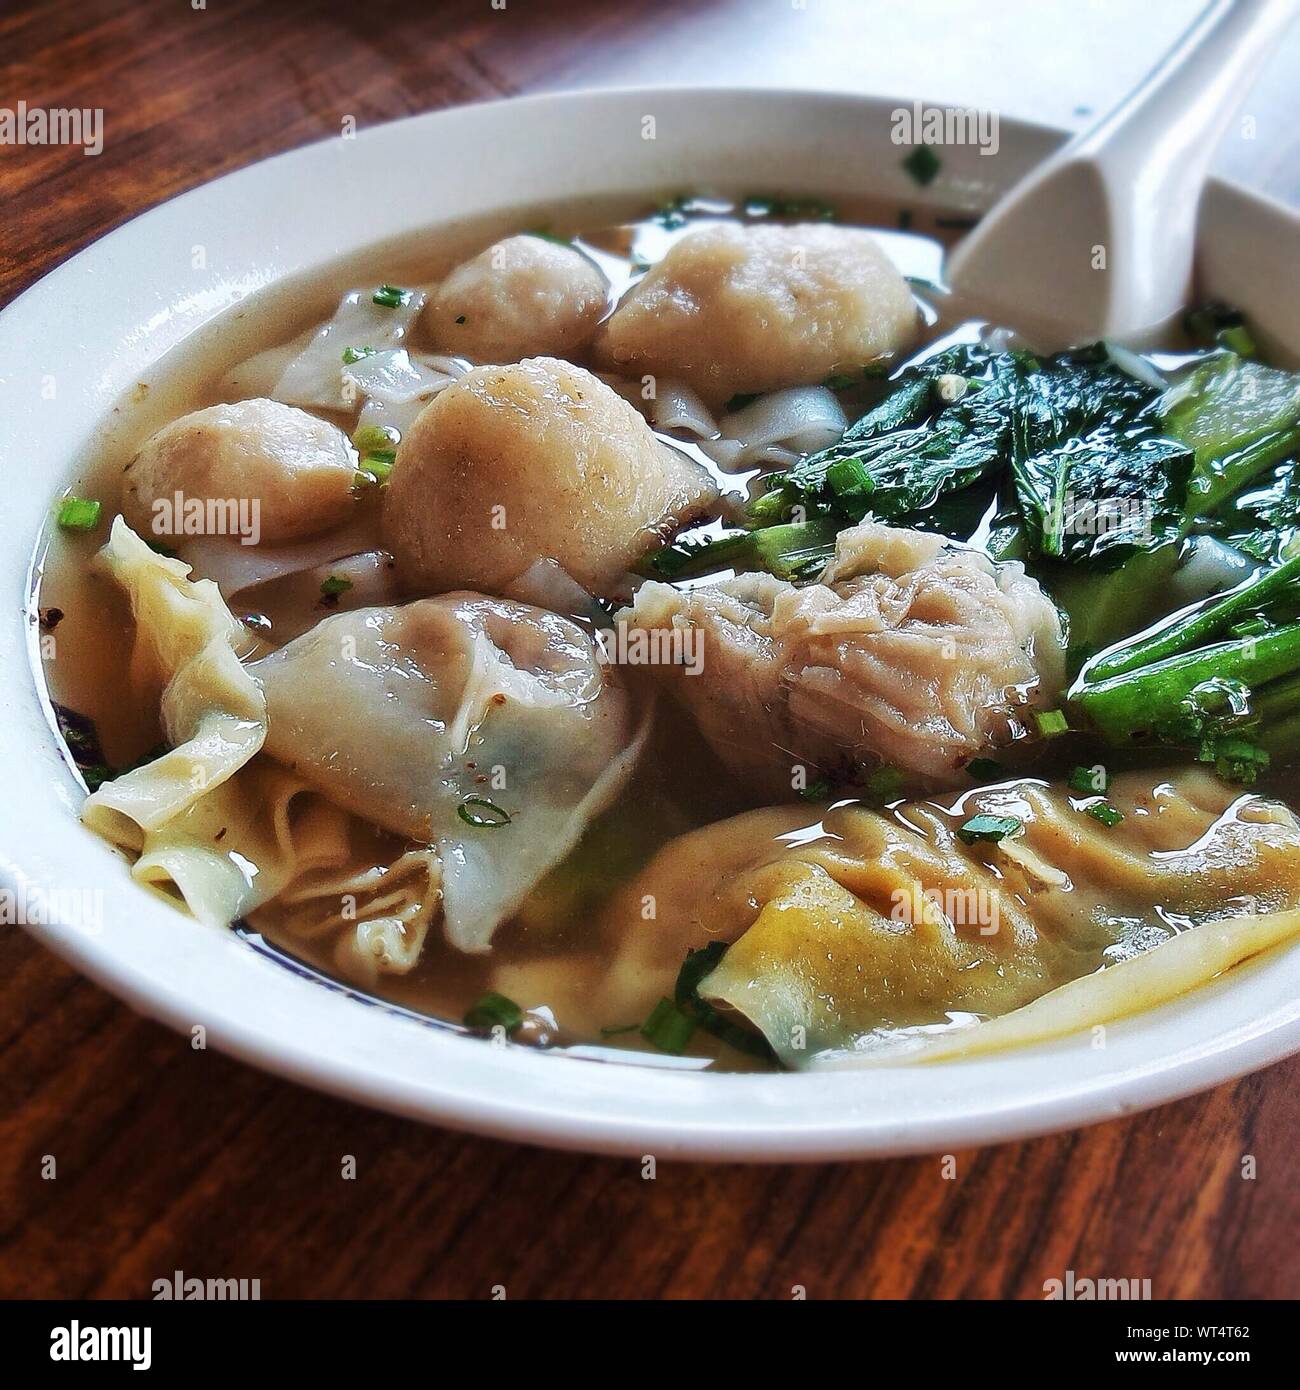 Close-up Of Foo Chow Fishball In Bowl On Table Stock Photo